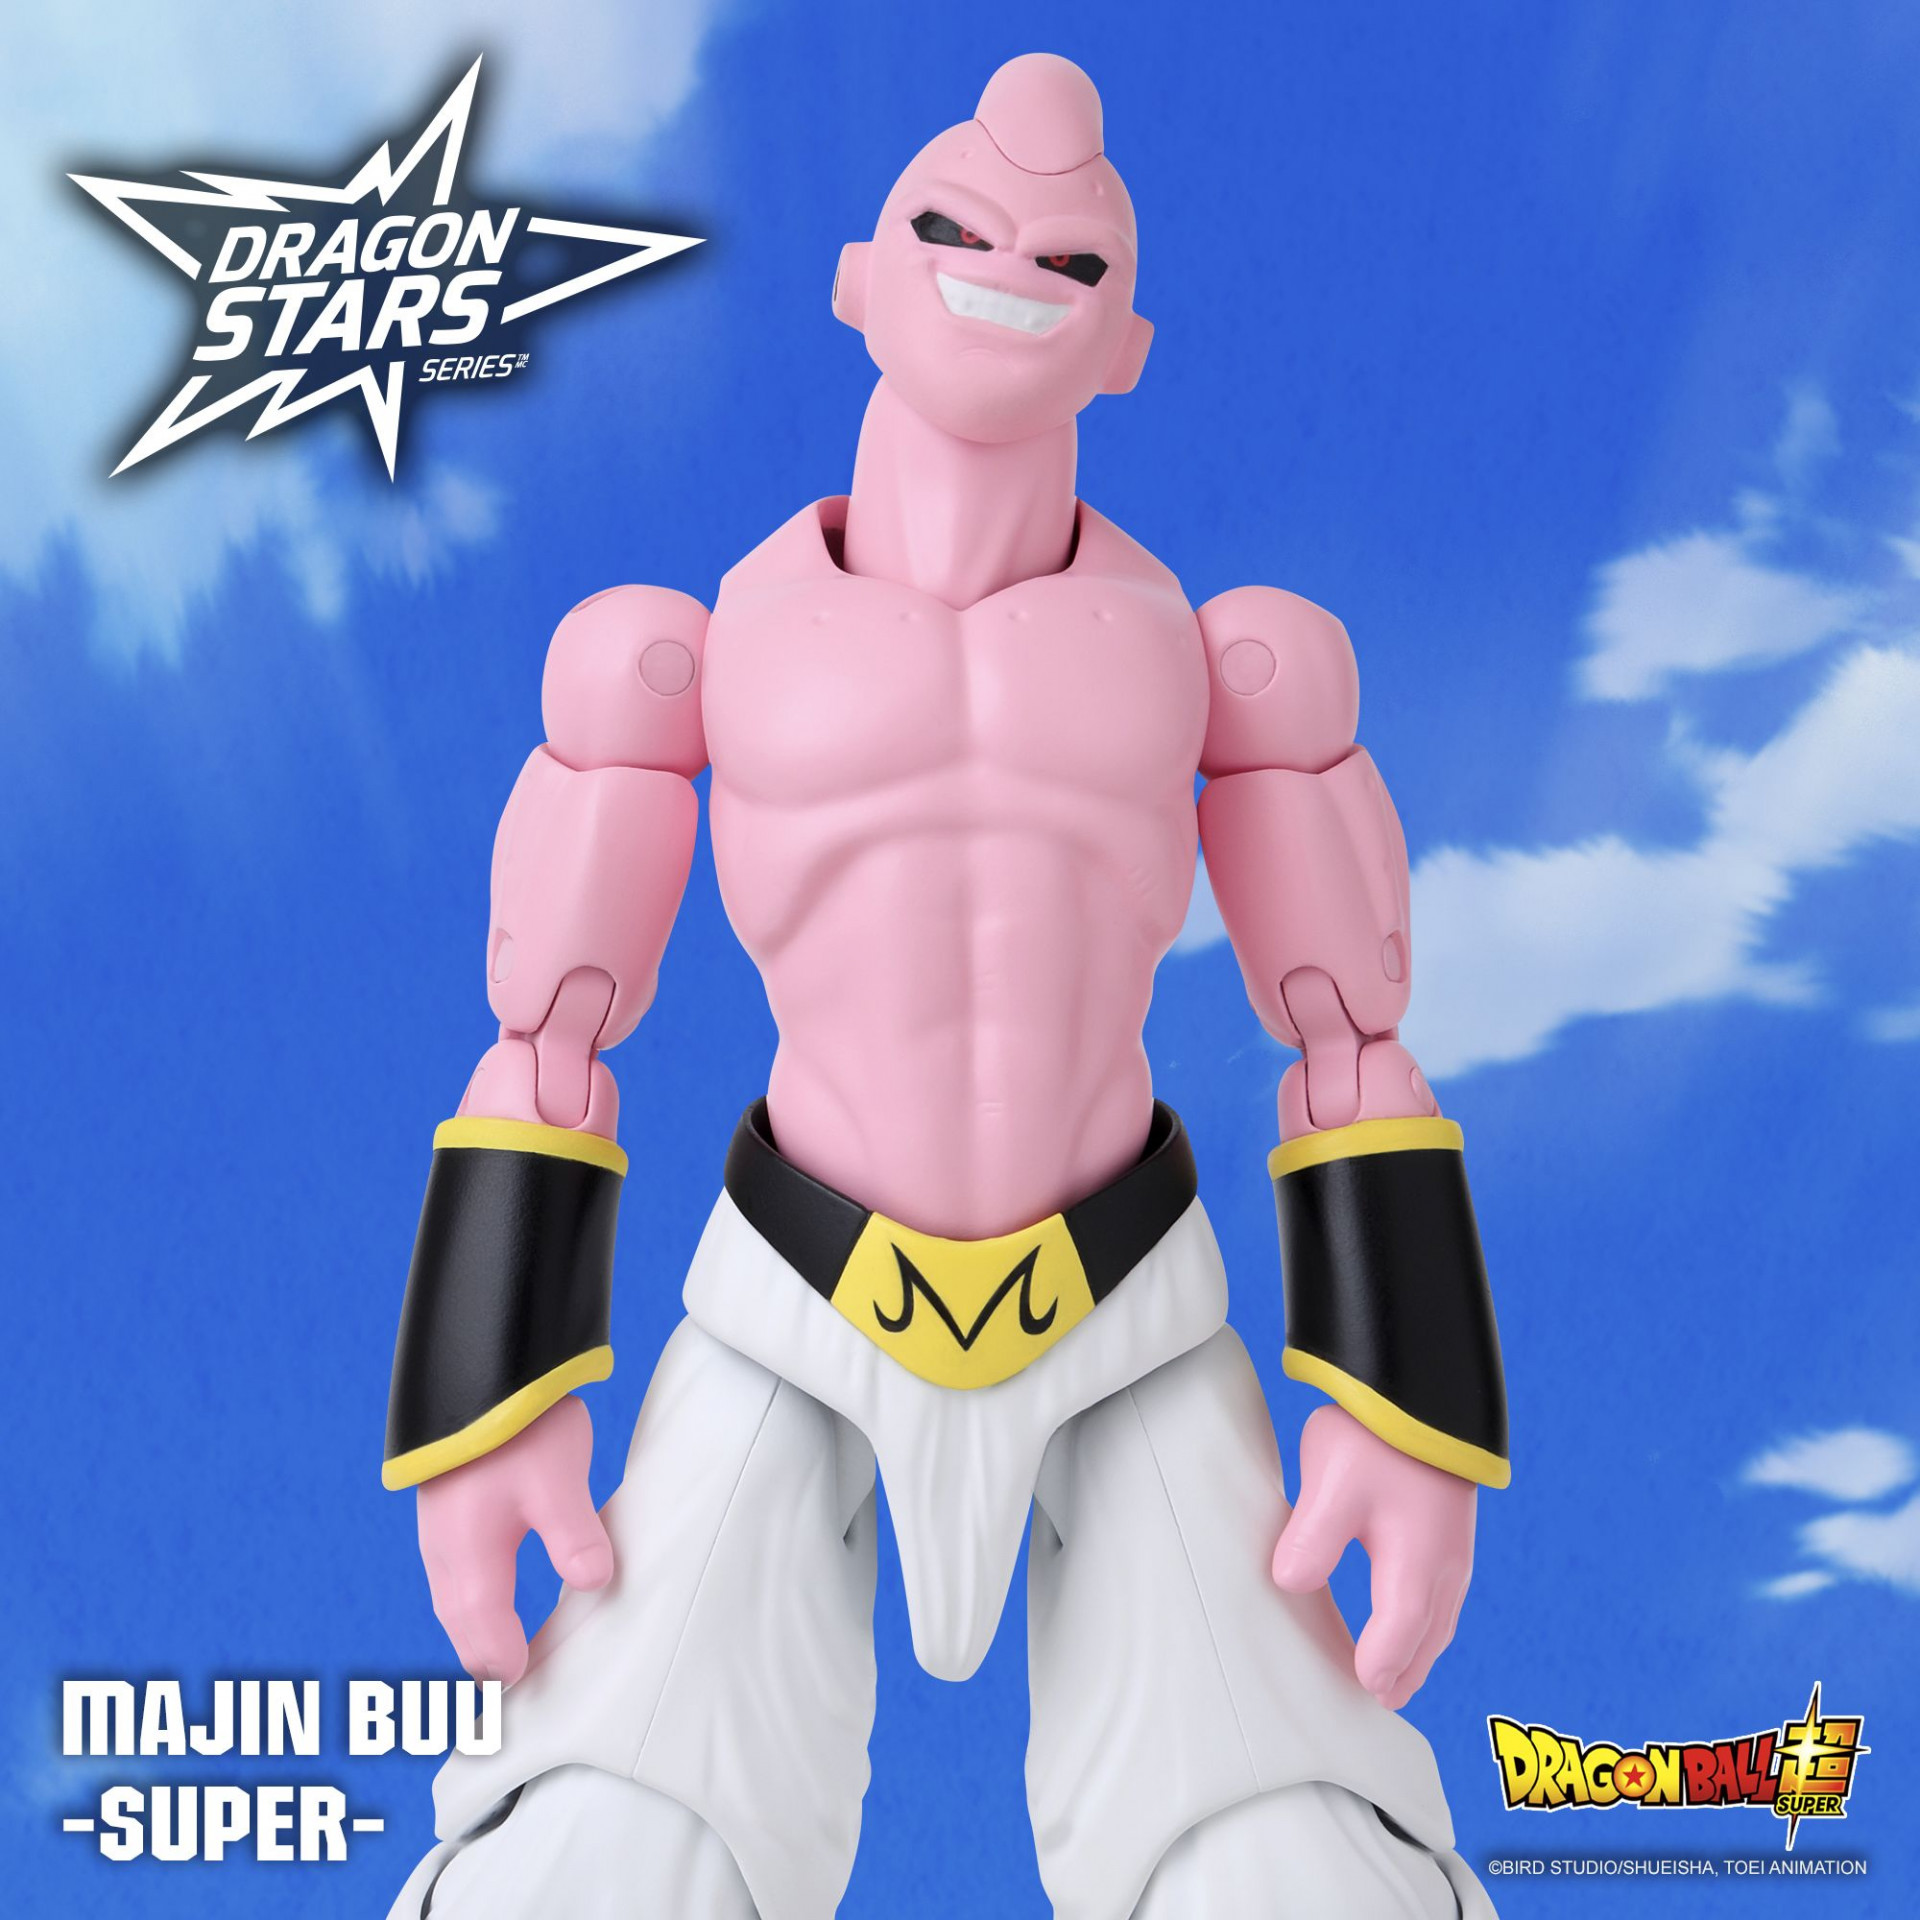 Super Buu Is Coming to the Dragon Stars Series!